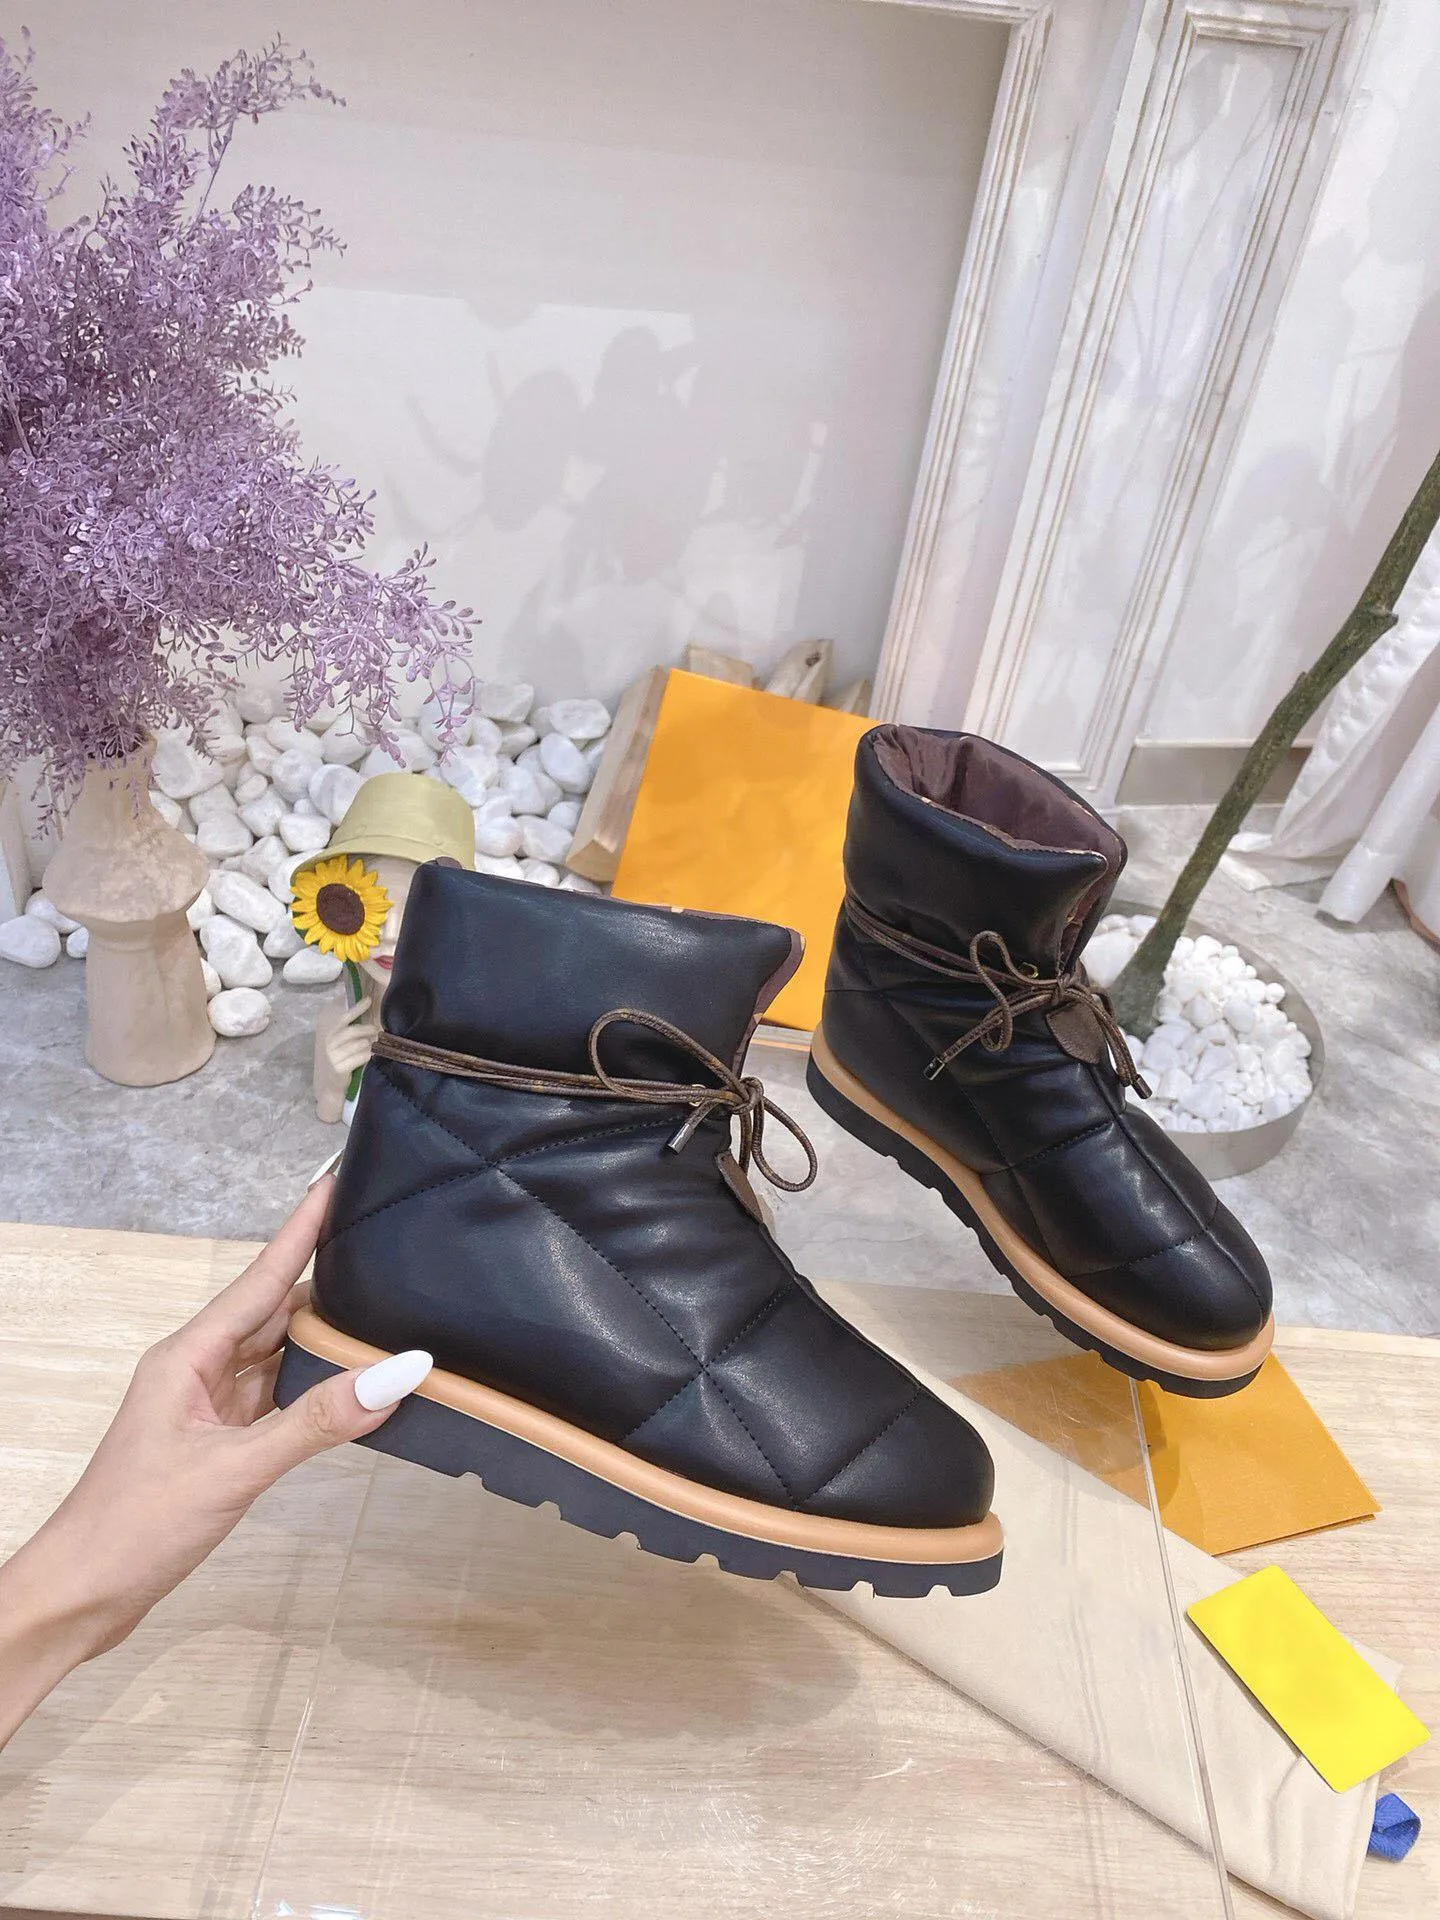 Luxury Women Boots Pillow Comfort Womens Leather Shoes Ankle Boot Winter for Hiking Work Outdoor Sneakers Size 35-41 with Box